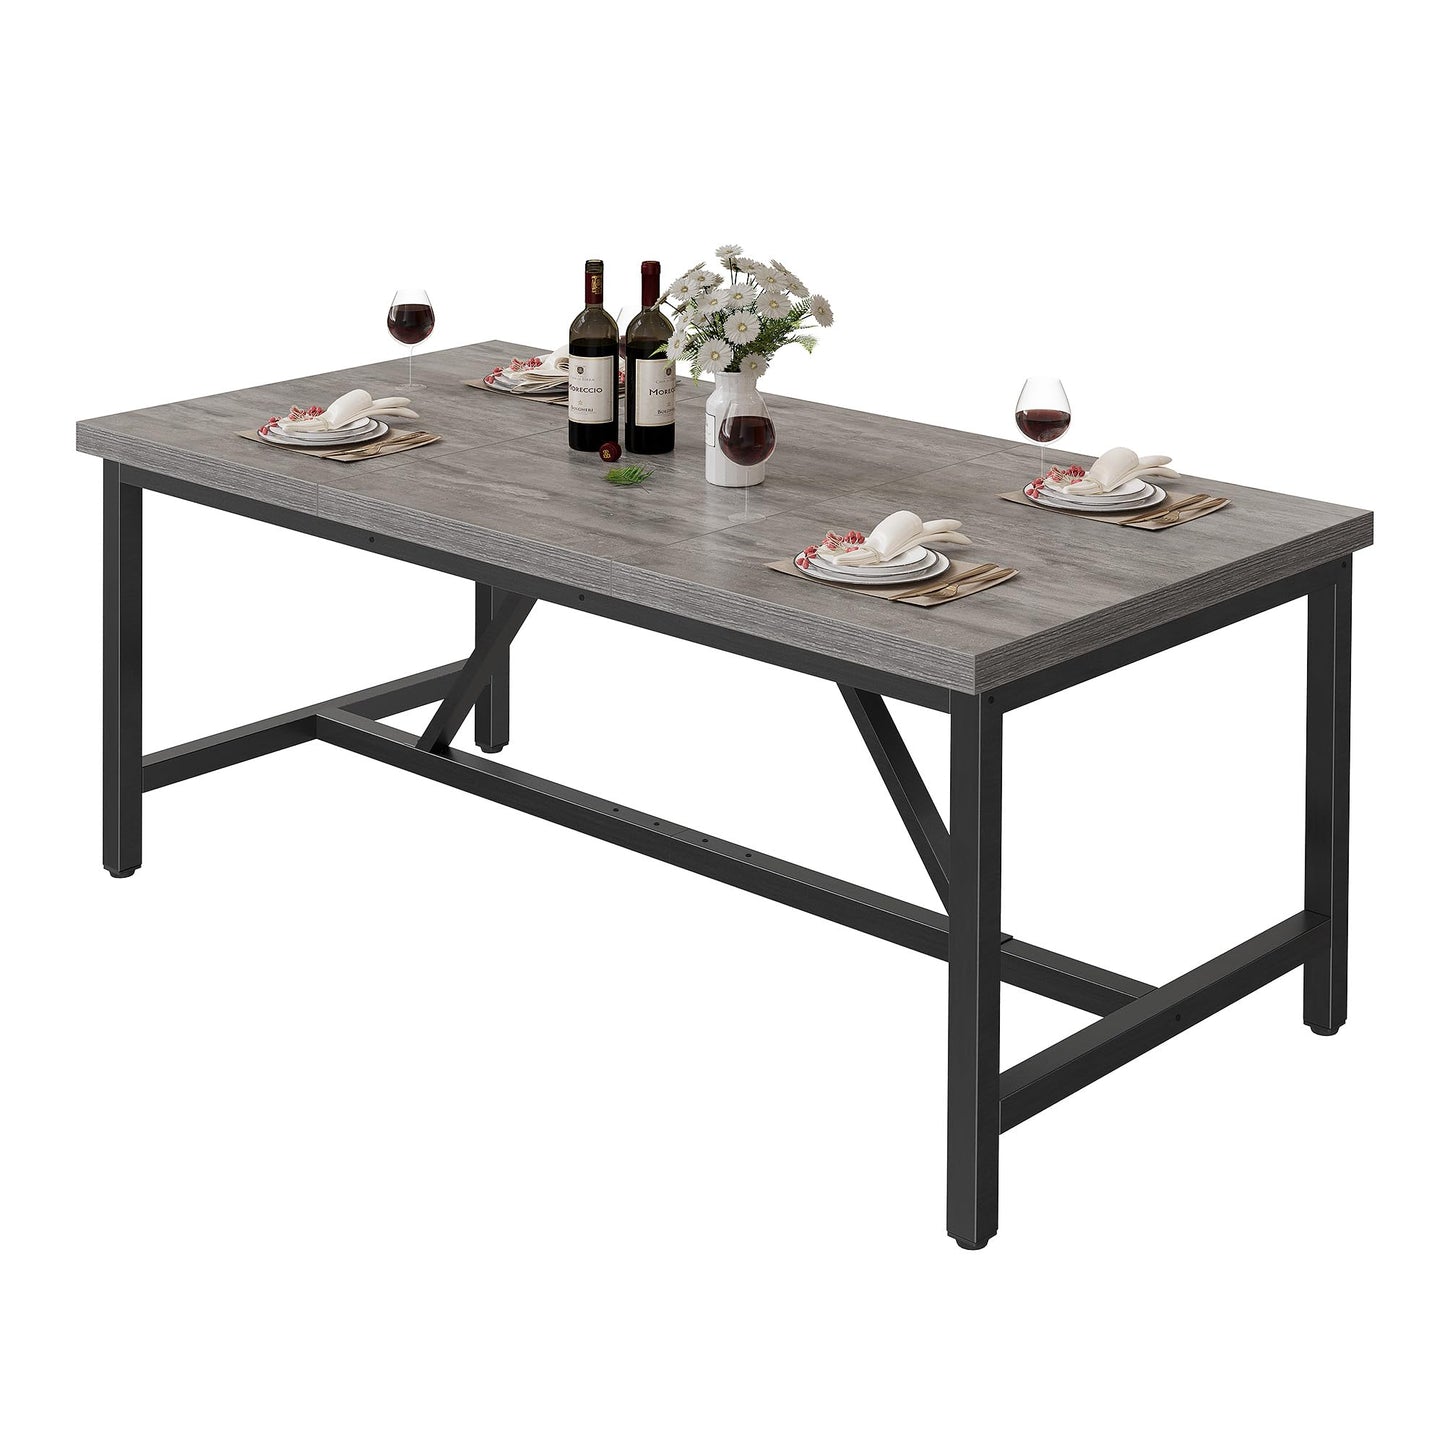 YITAHOME 70.8" Large Kitchen Dining Room Table for 6-8 People, Rustic Grey Farmhouse Industrial Wood Style Rectangle Apartment Dinning Room Dinette Tables for Eating Dinner